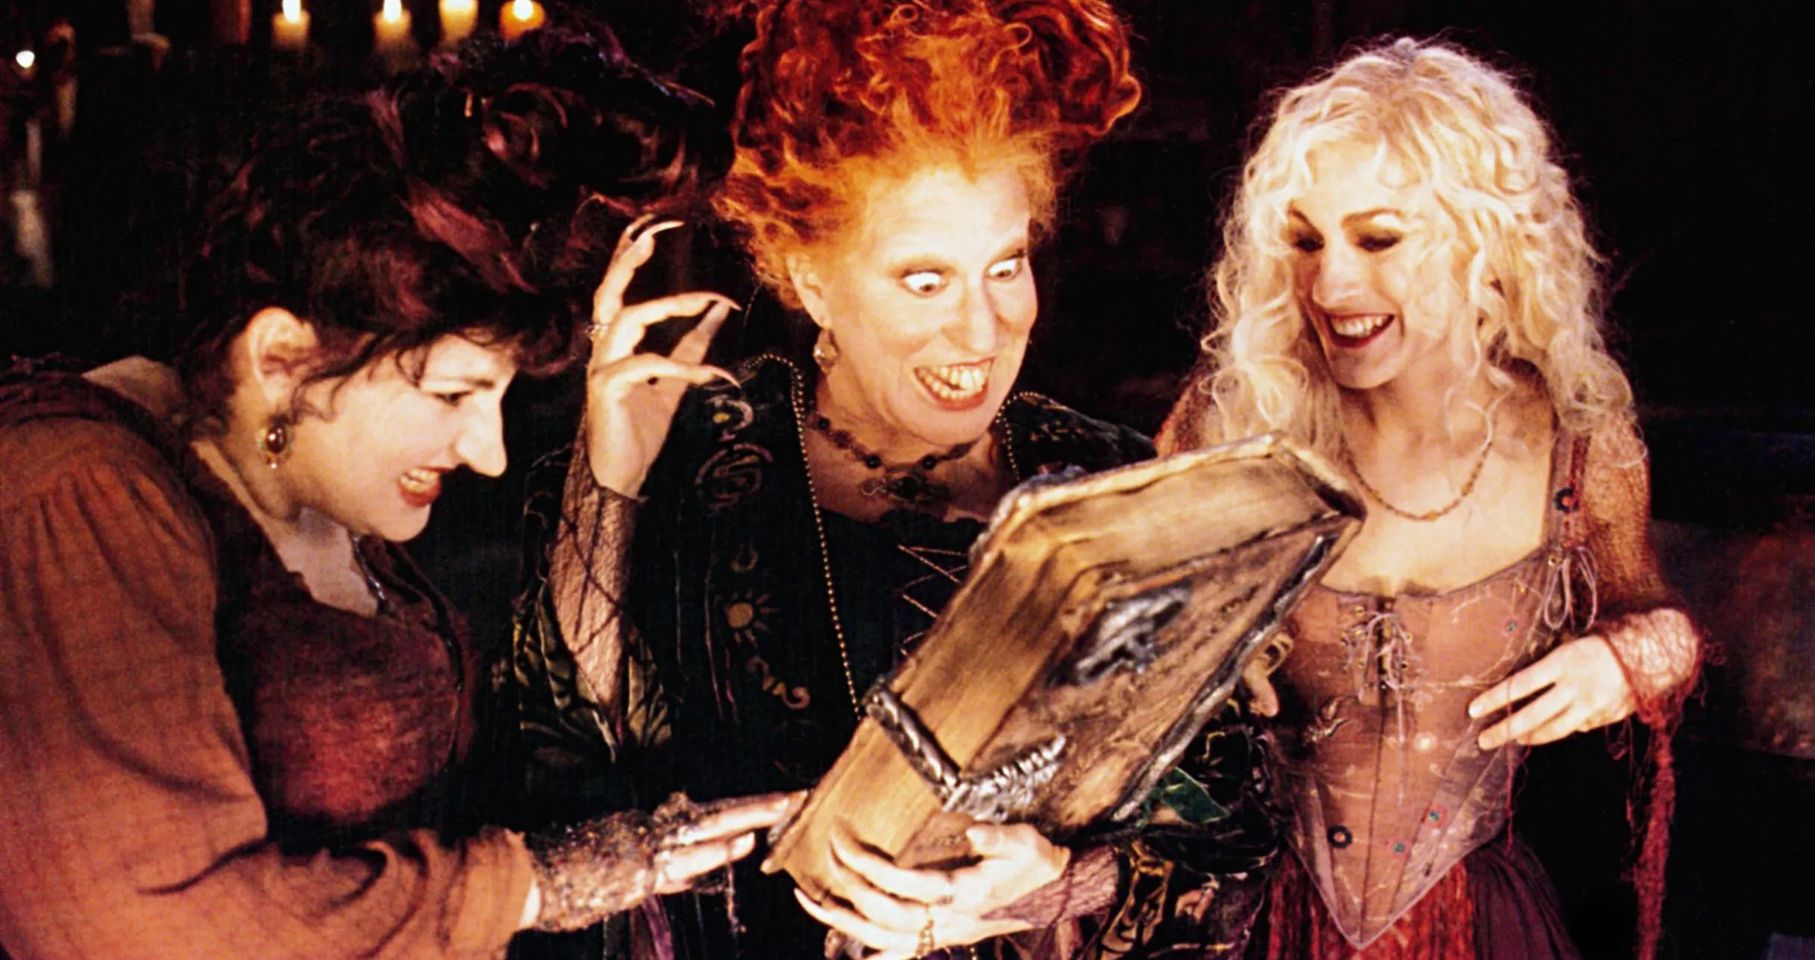 Three women, styled as mystical witches, show visible excitement and curiosity. One reads from a large book in an enthralling environment with dim lighting.